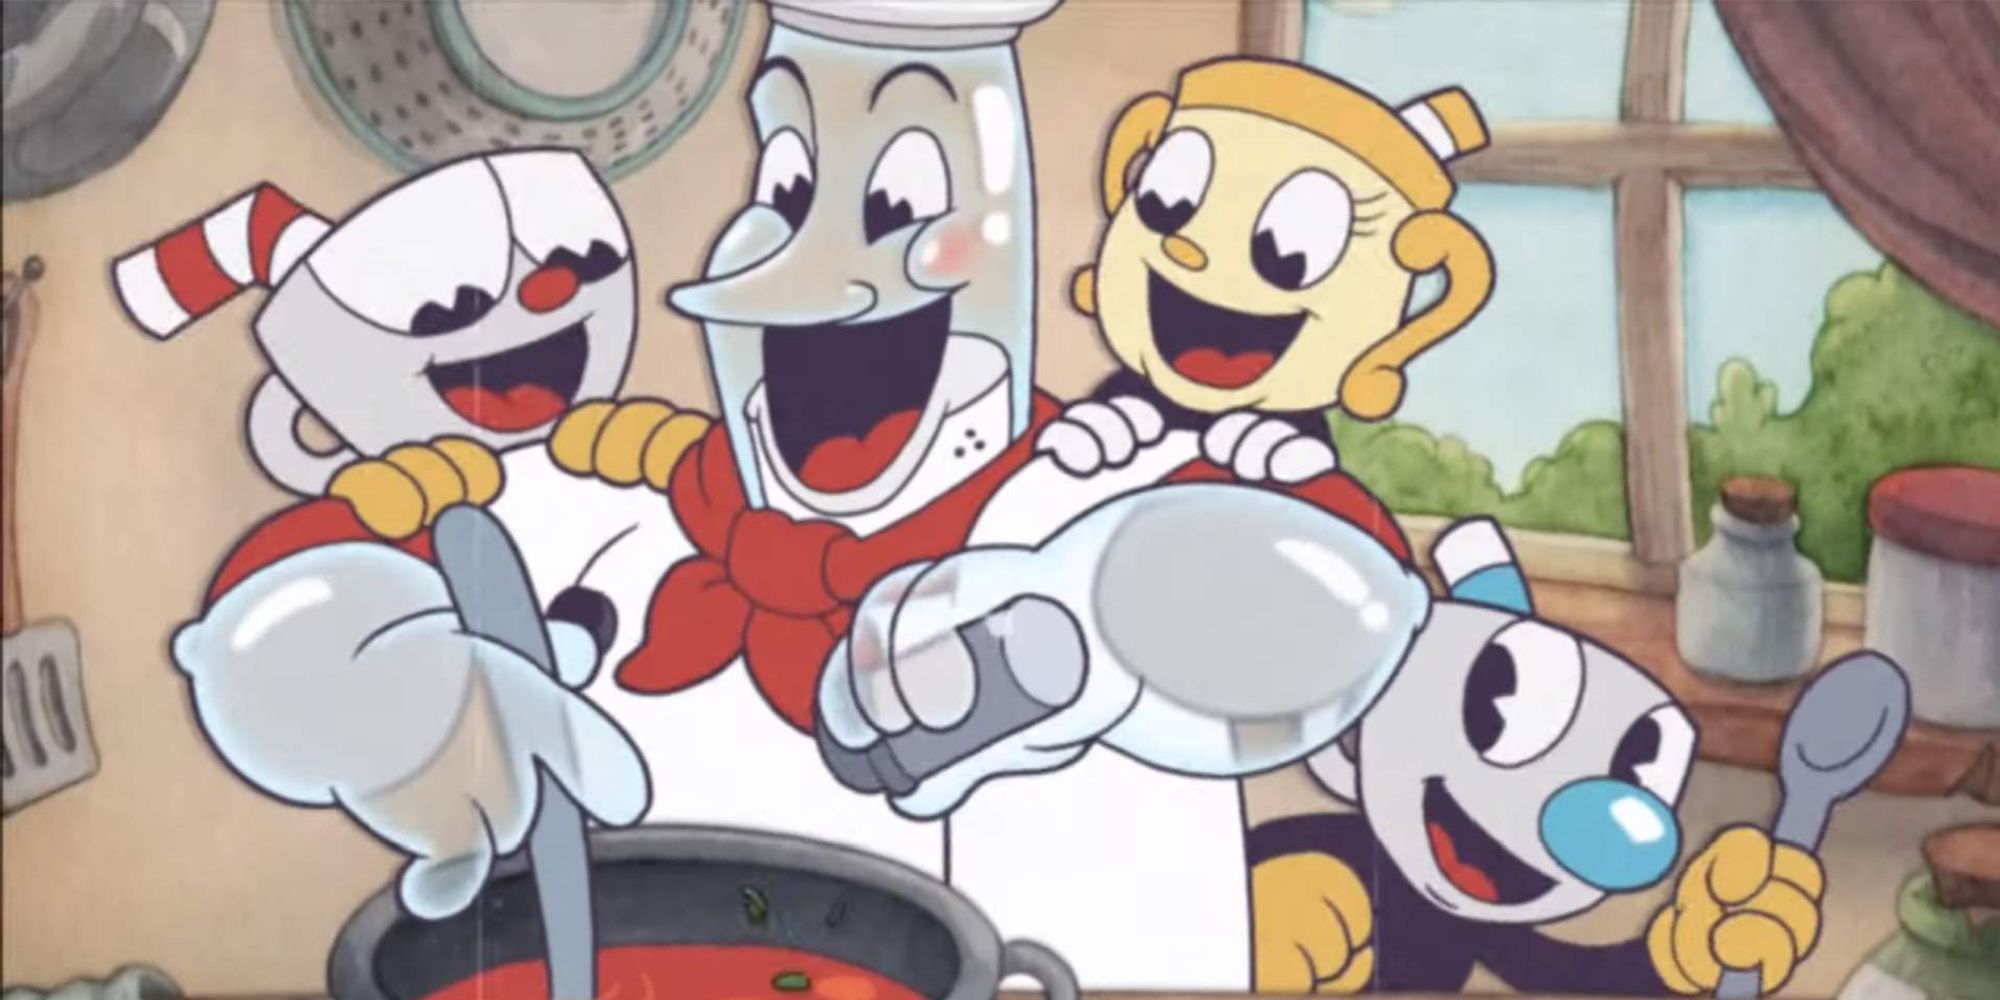 Cuphead PS4 Trophy Guide: The Best Tips To Earn The Platinum Trophy